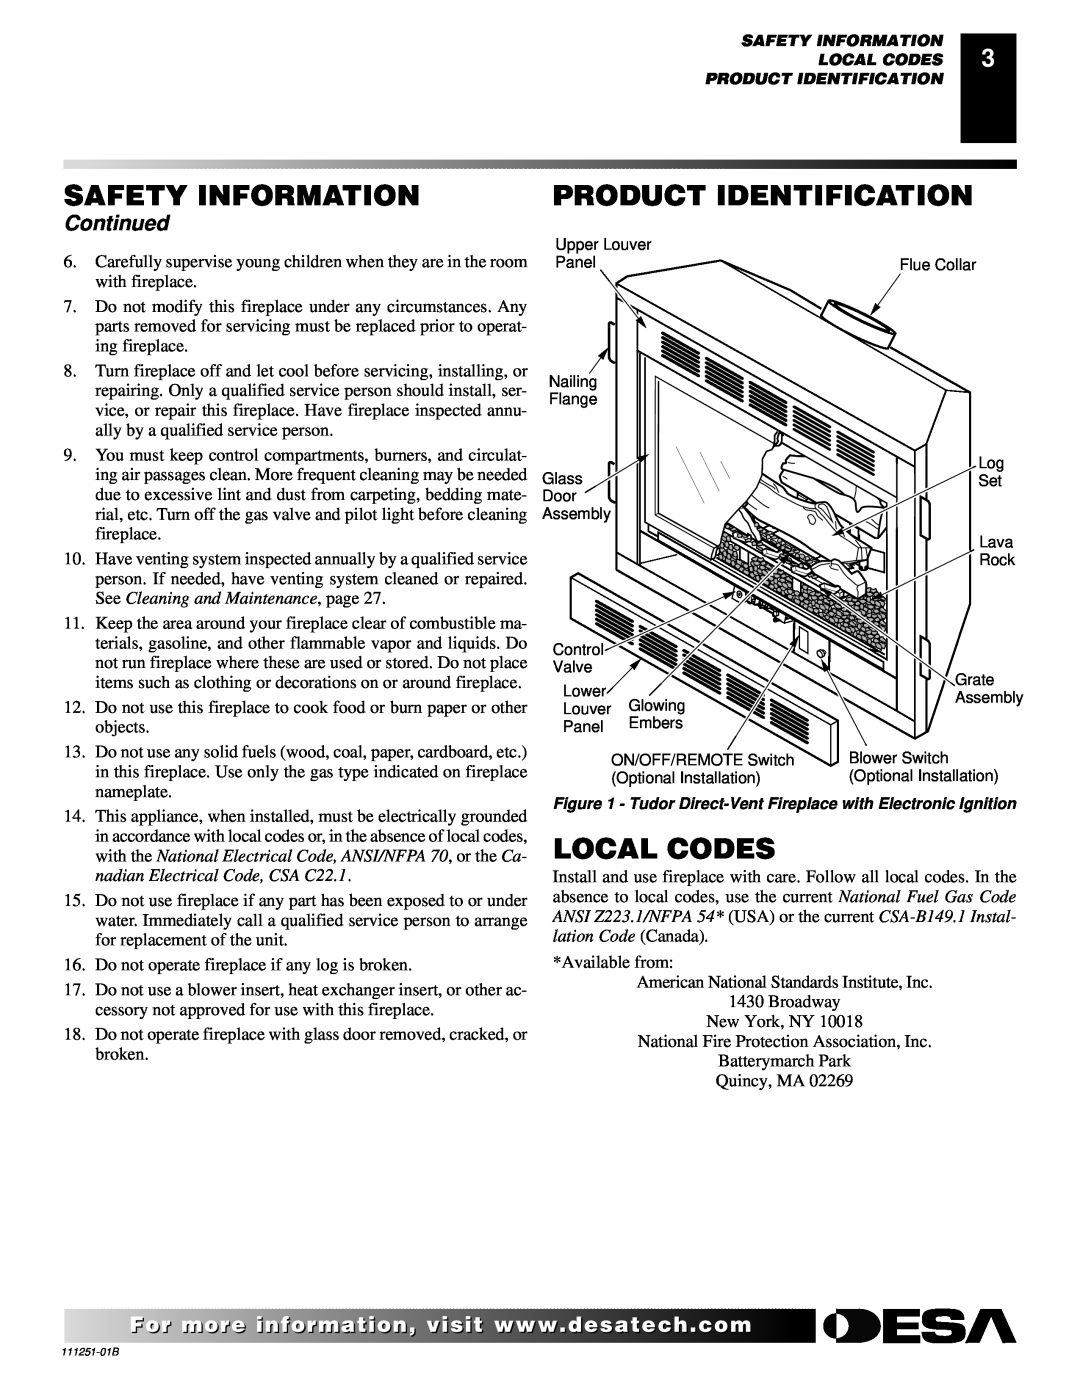 Desa (V)T36ENA installation manual Product Identification, Local Codes, Continued, Safety Information 